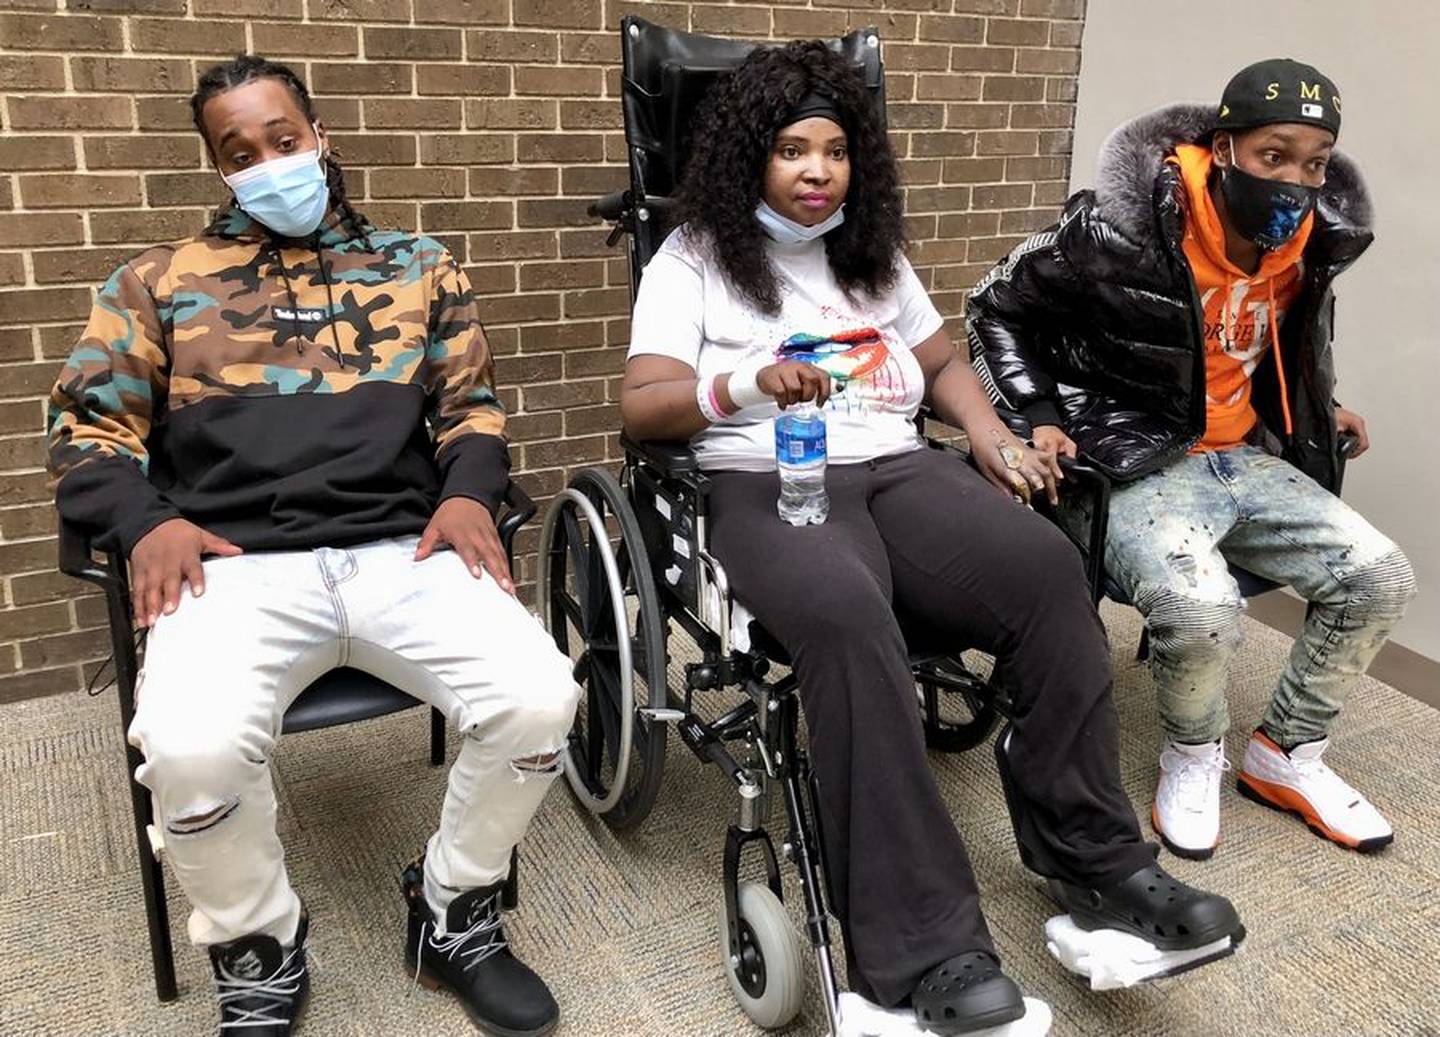 Shaquita Slaughter left Advocate Lutheran General Hospital, with her brothers Princeton Carter, right, and Pierre Carter, after a long battle with COVID-19.